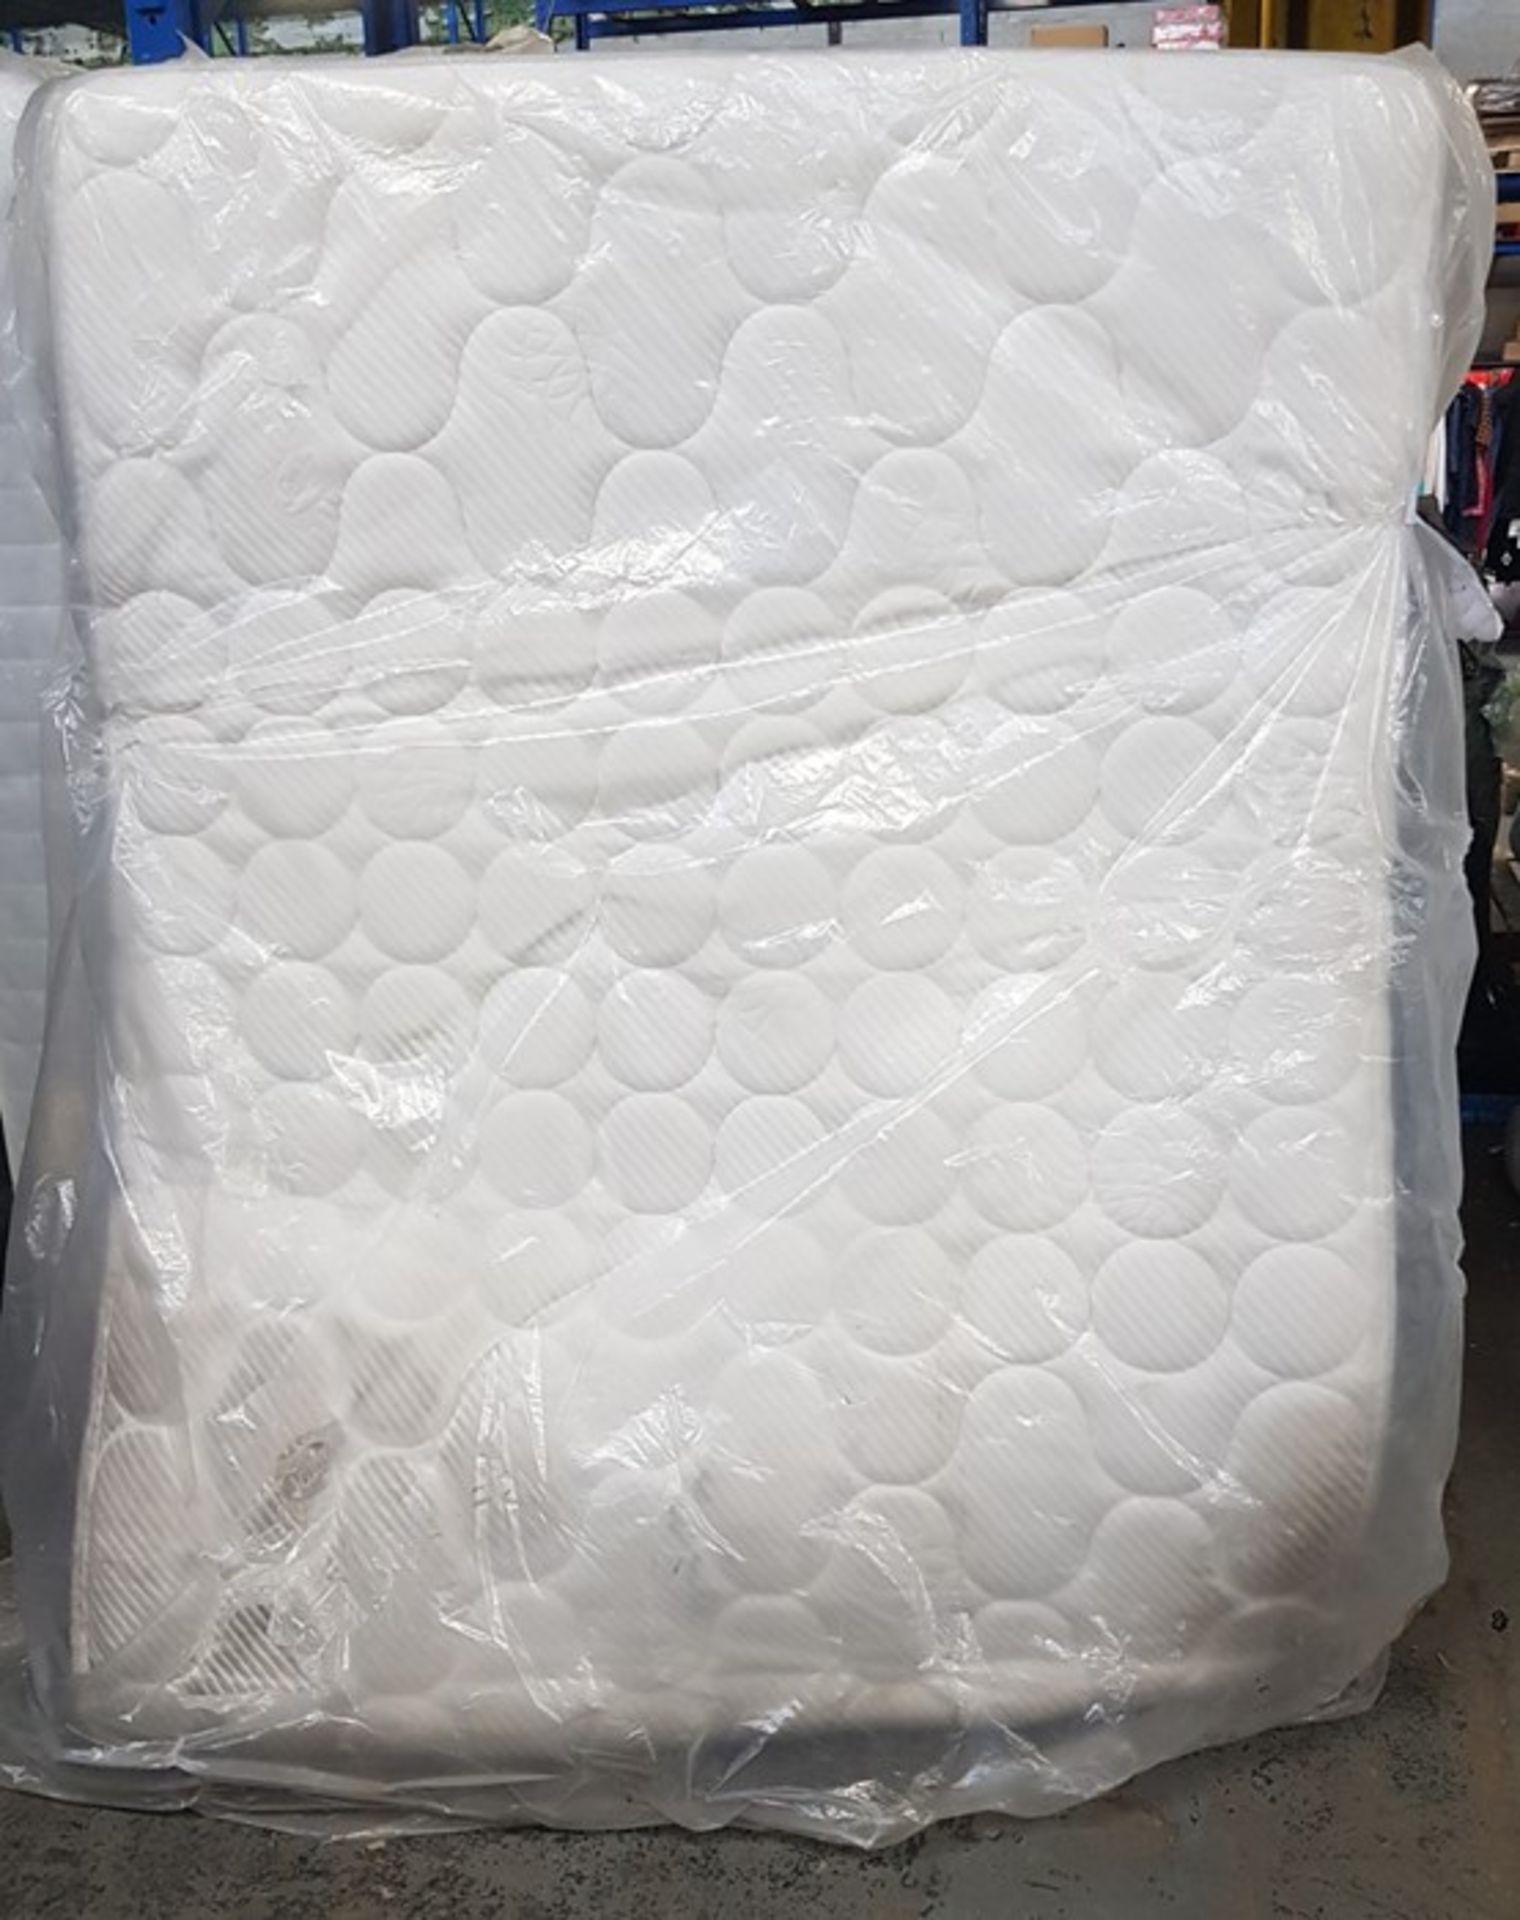 1 BAGGED 150CM KING SIZE COMBINATION MATTRESS / NEEDS A CLEAN / RRP / £411.99 (PUBLIC VIEWING